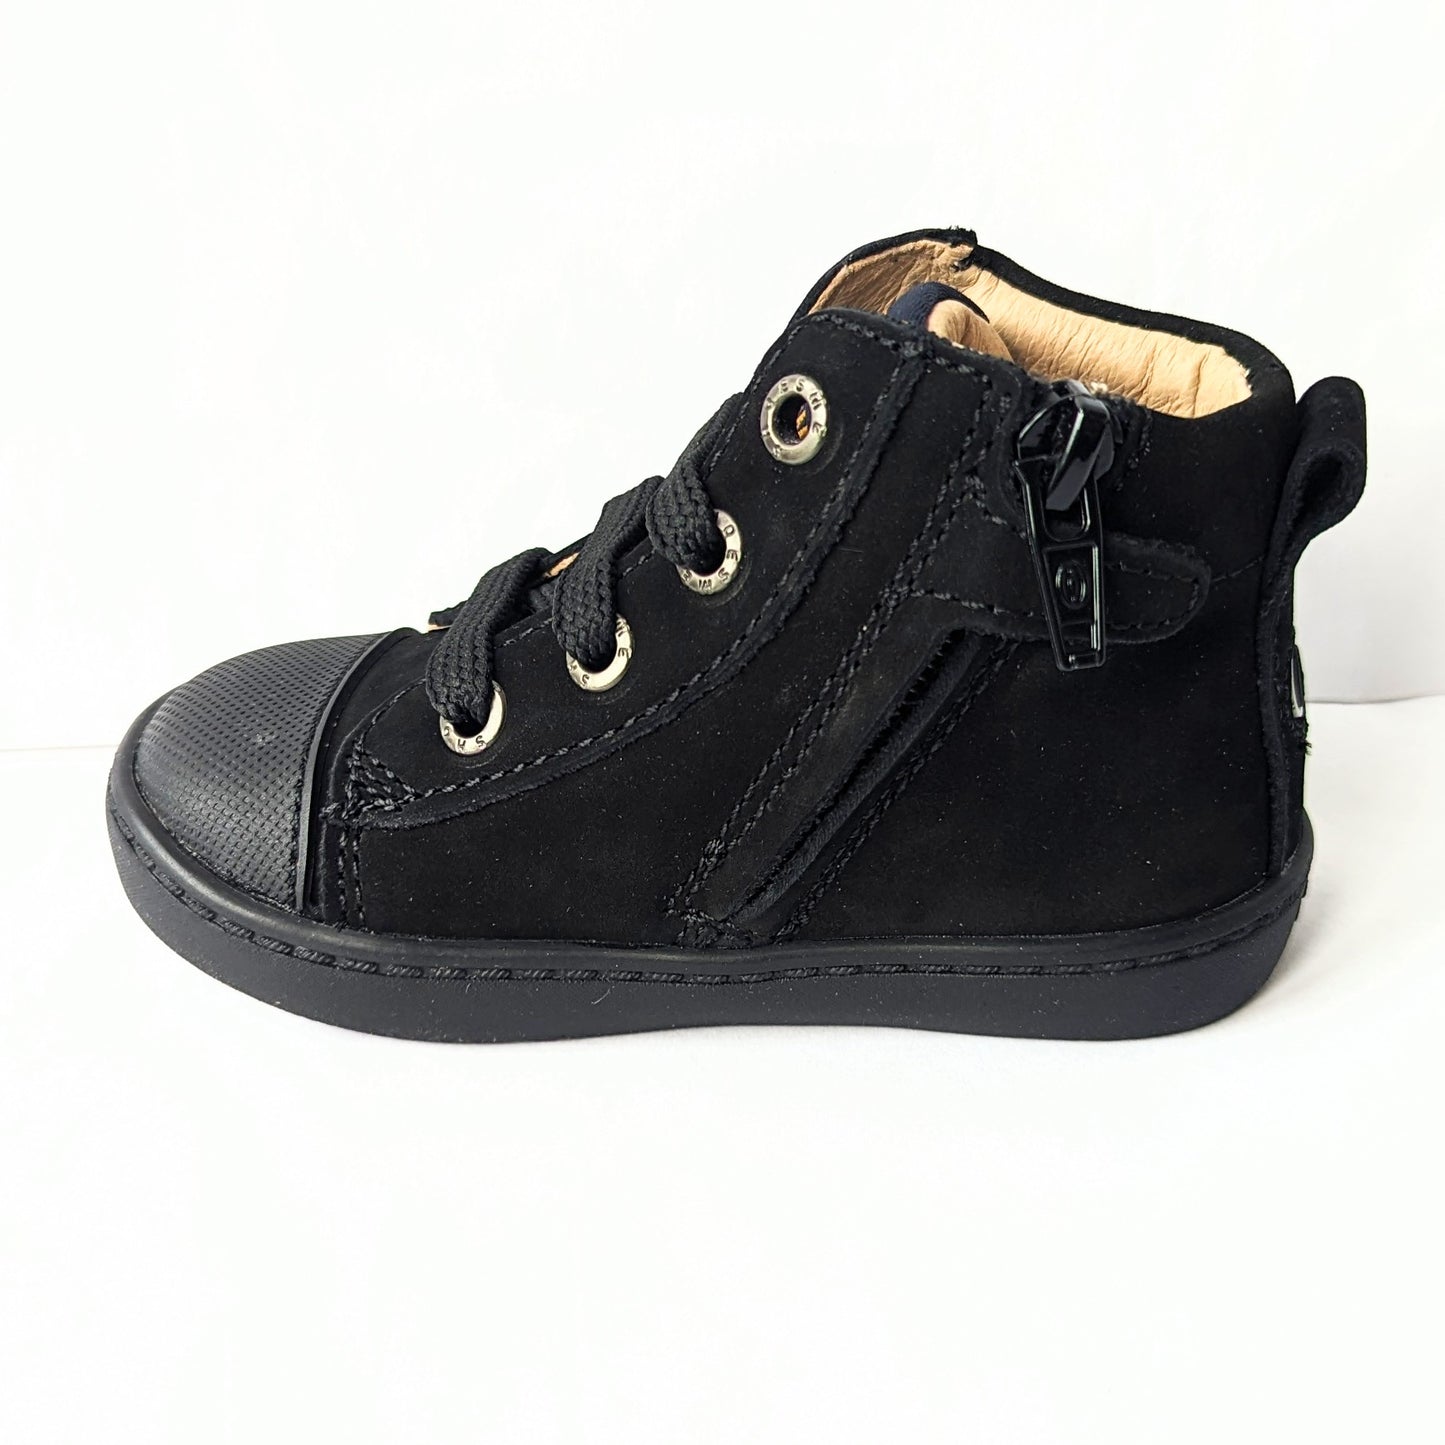 A unisex hi-top boot by Shoesme, style FL23W002-A in black leather nubuck with lace and zip fastening. Left side view.